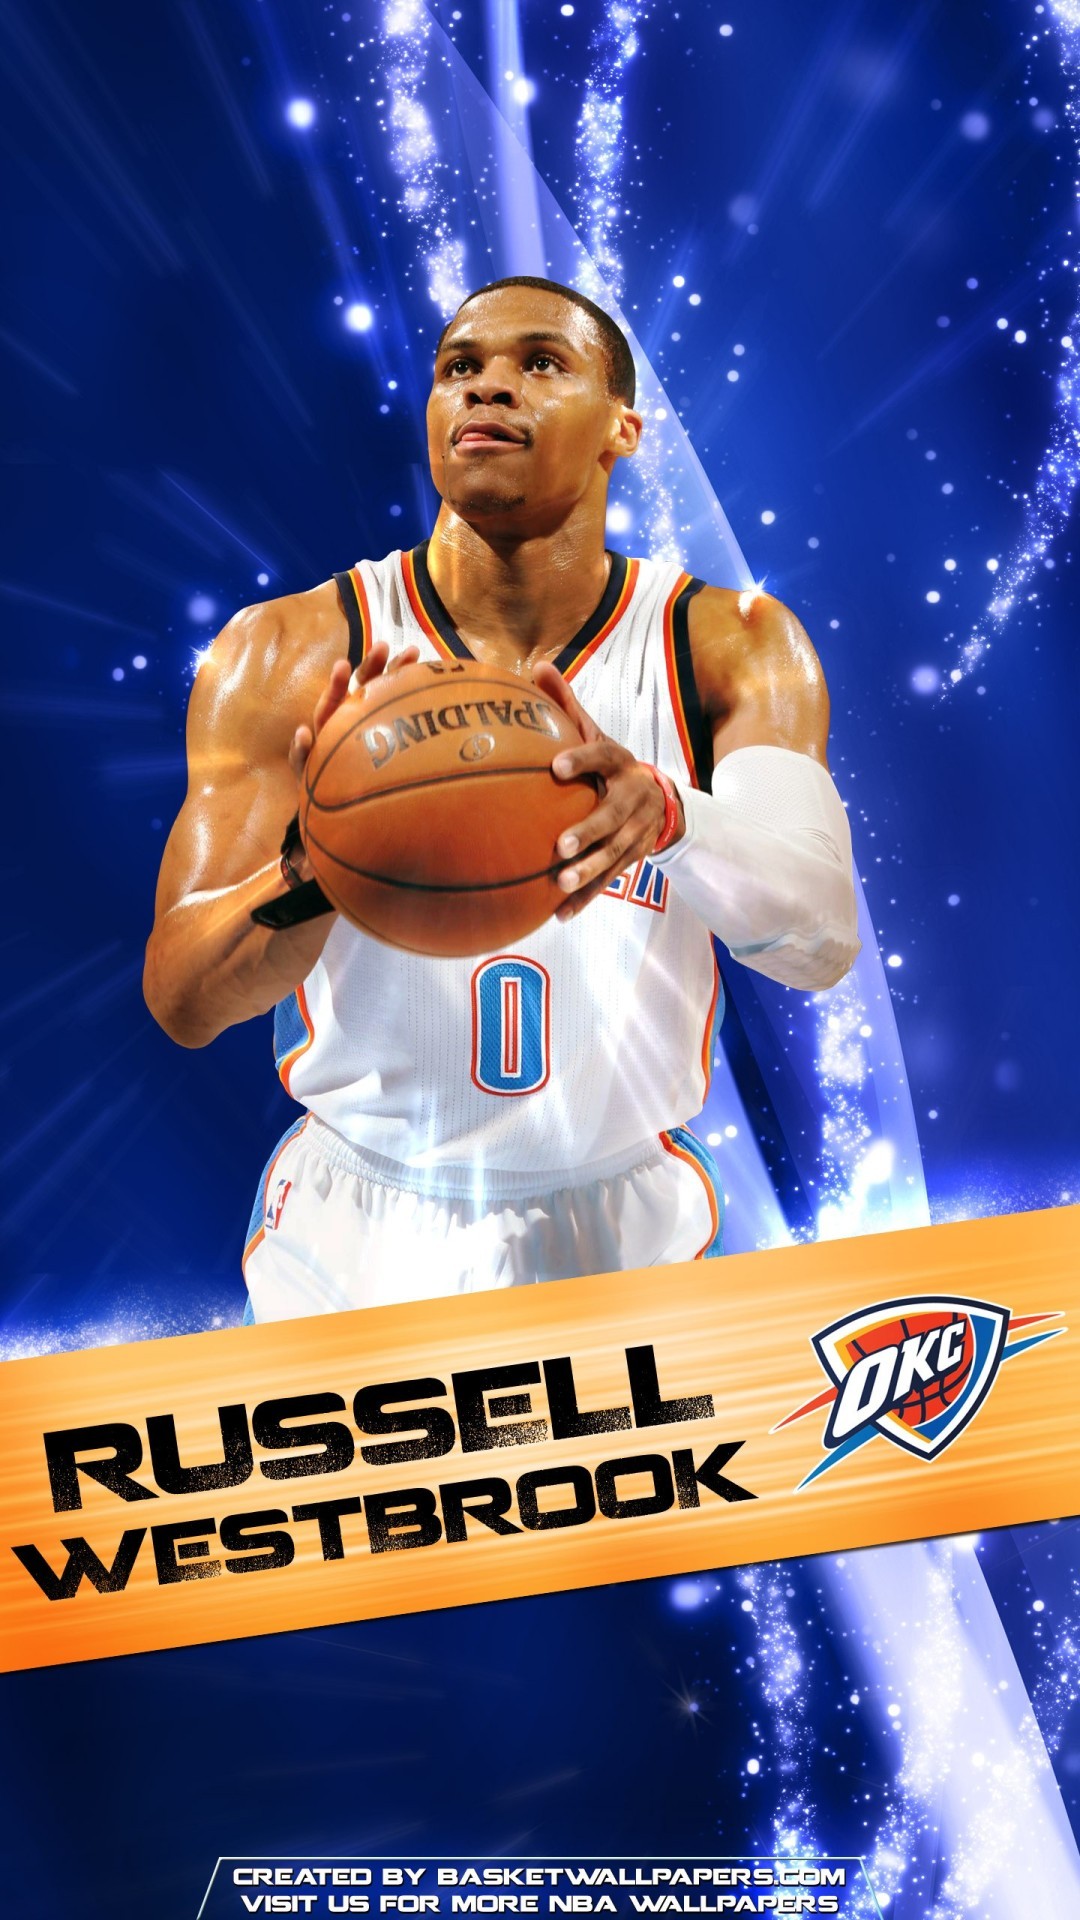 View Larger Image Russell Westbrook NBA iPhone Wallpaper